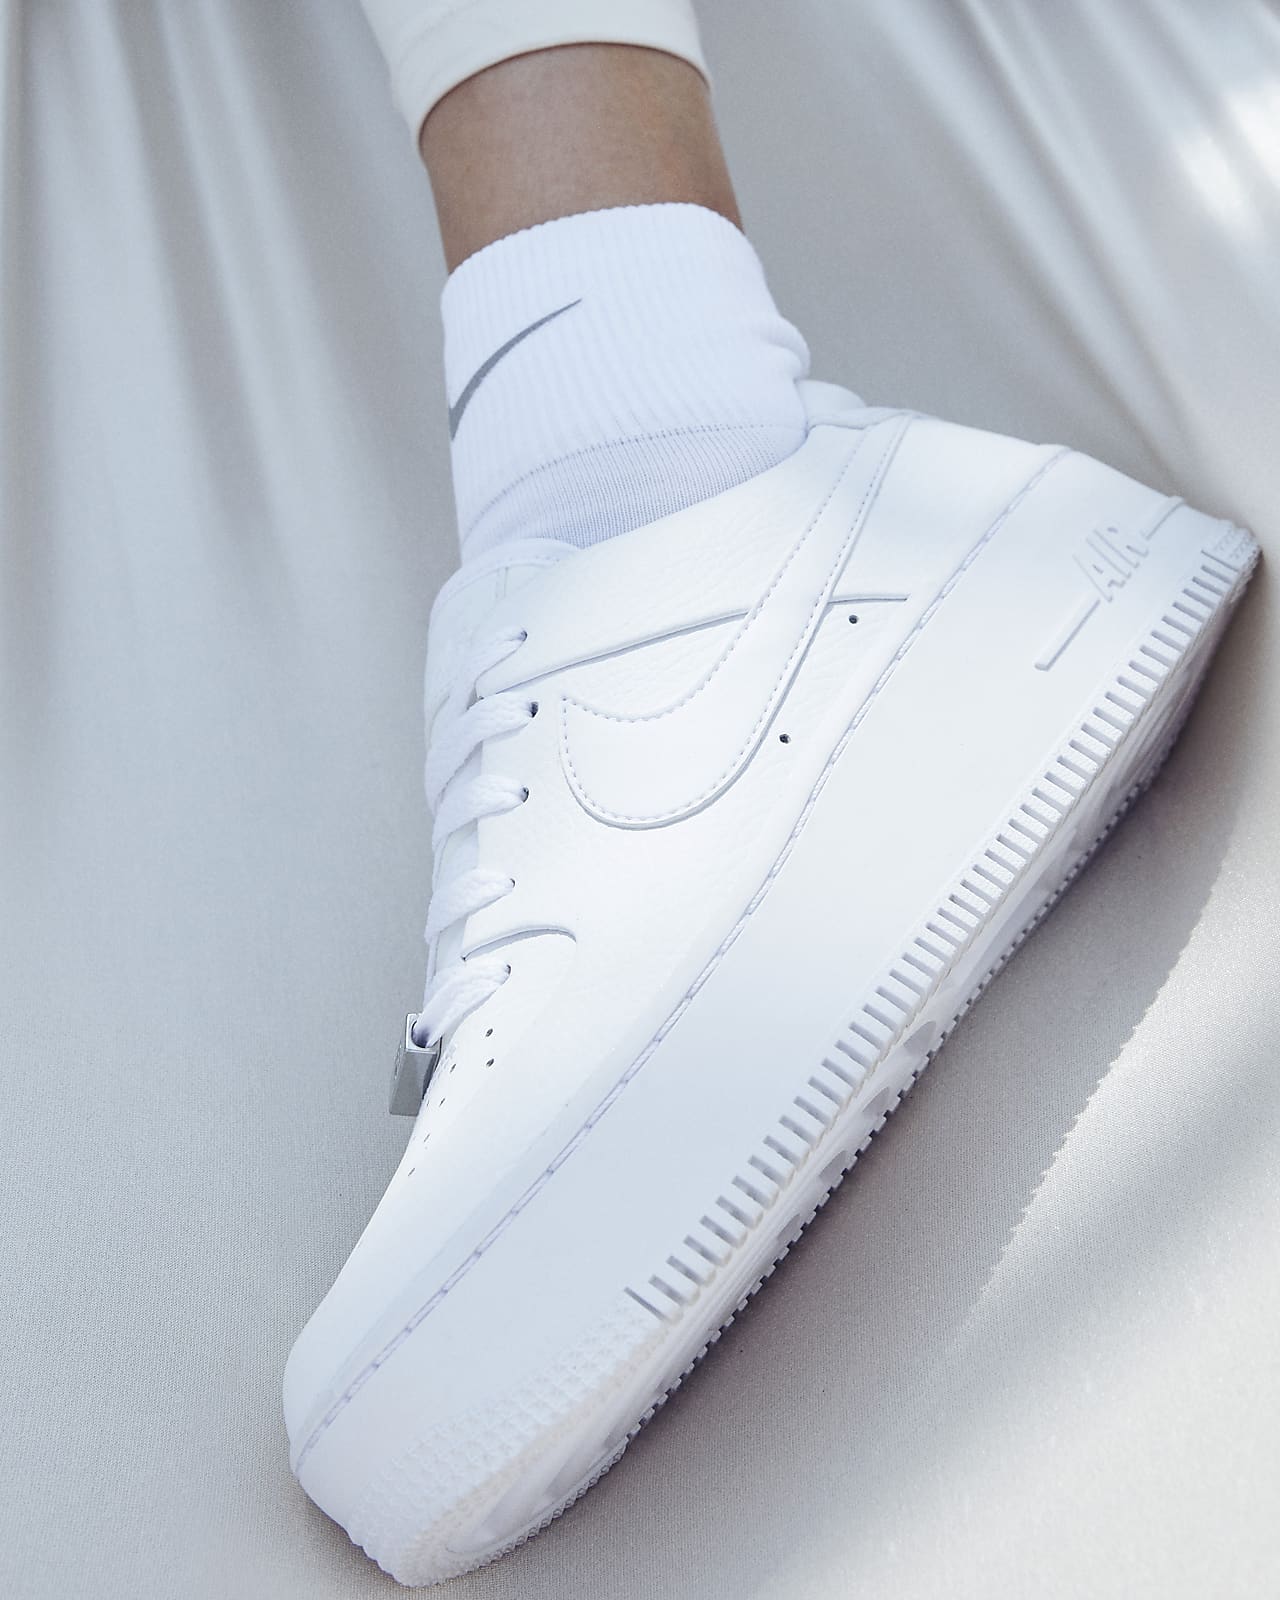 nike air force 1 sage low womens white